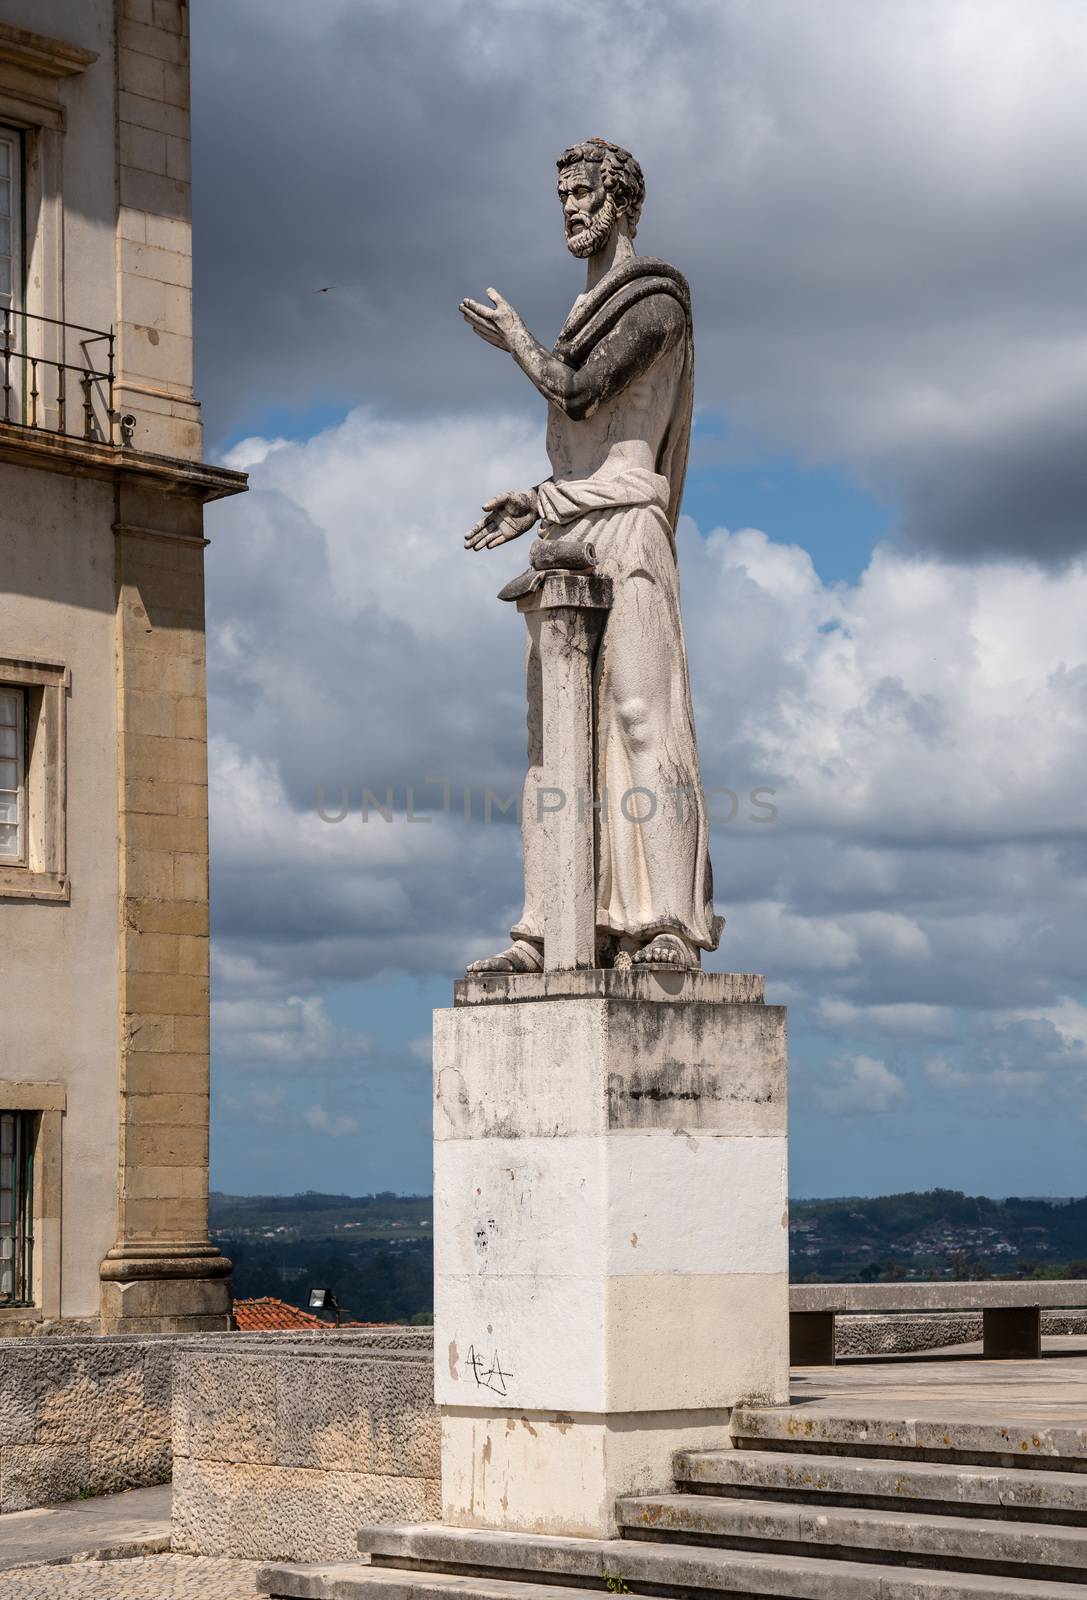 Statue to Greek philosopher outside the modern Literature building at the University of Coimbra